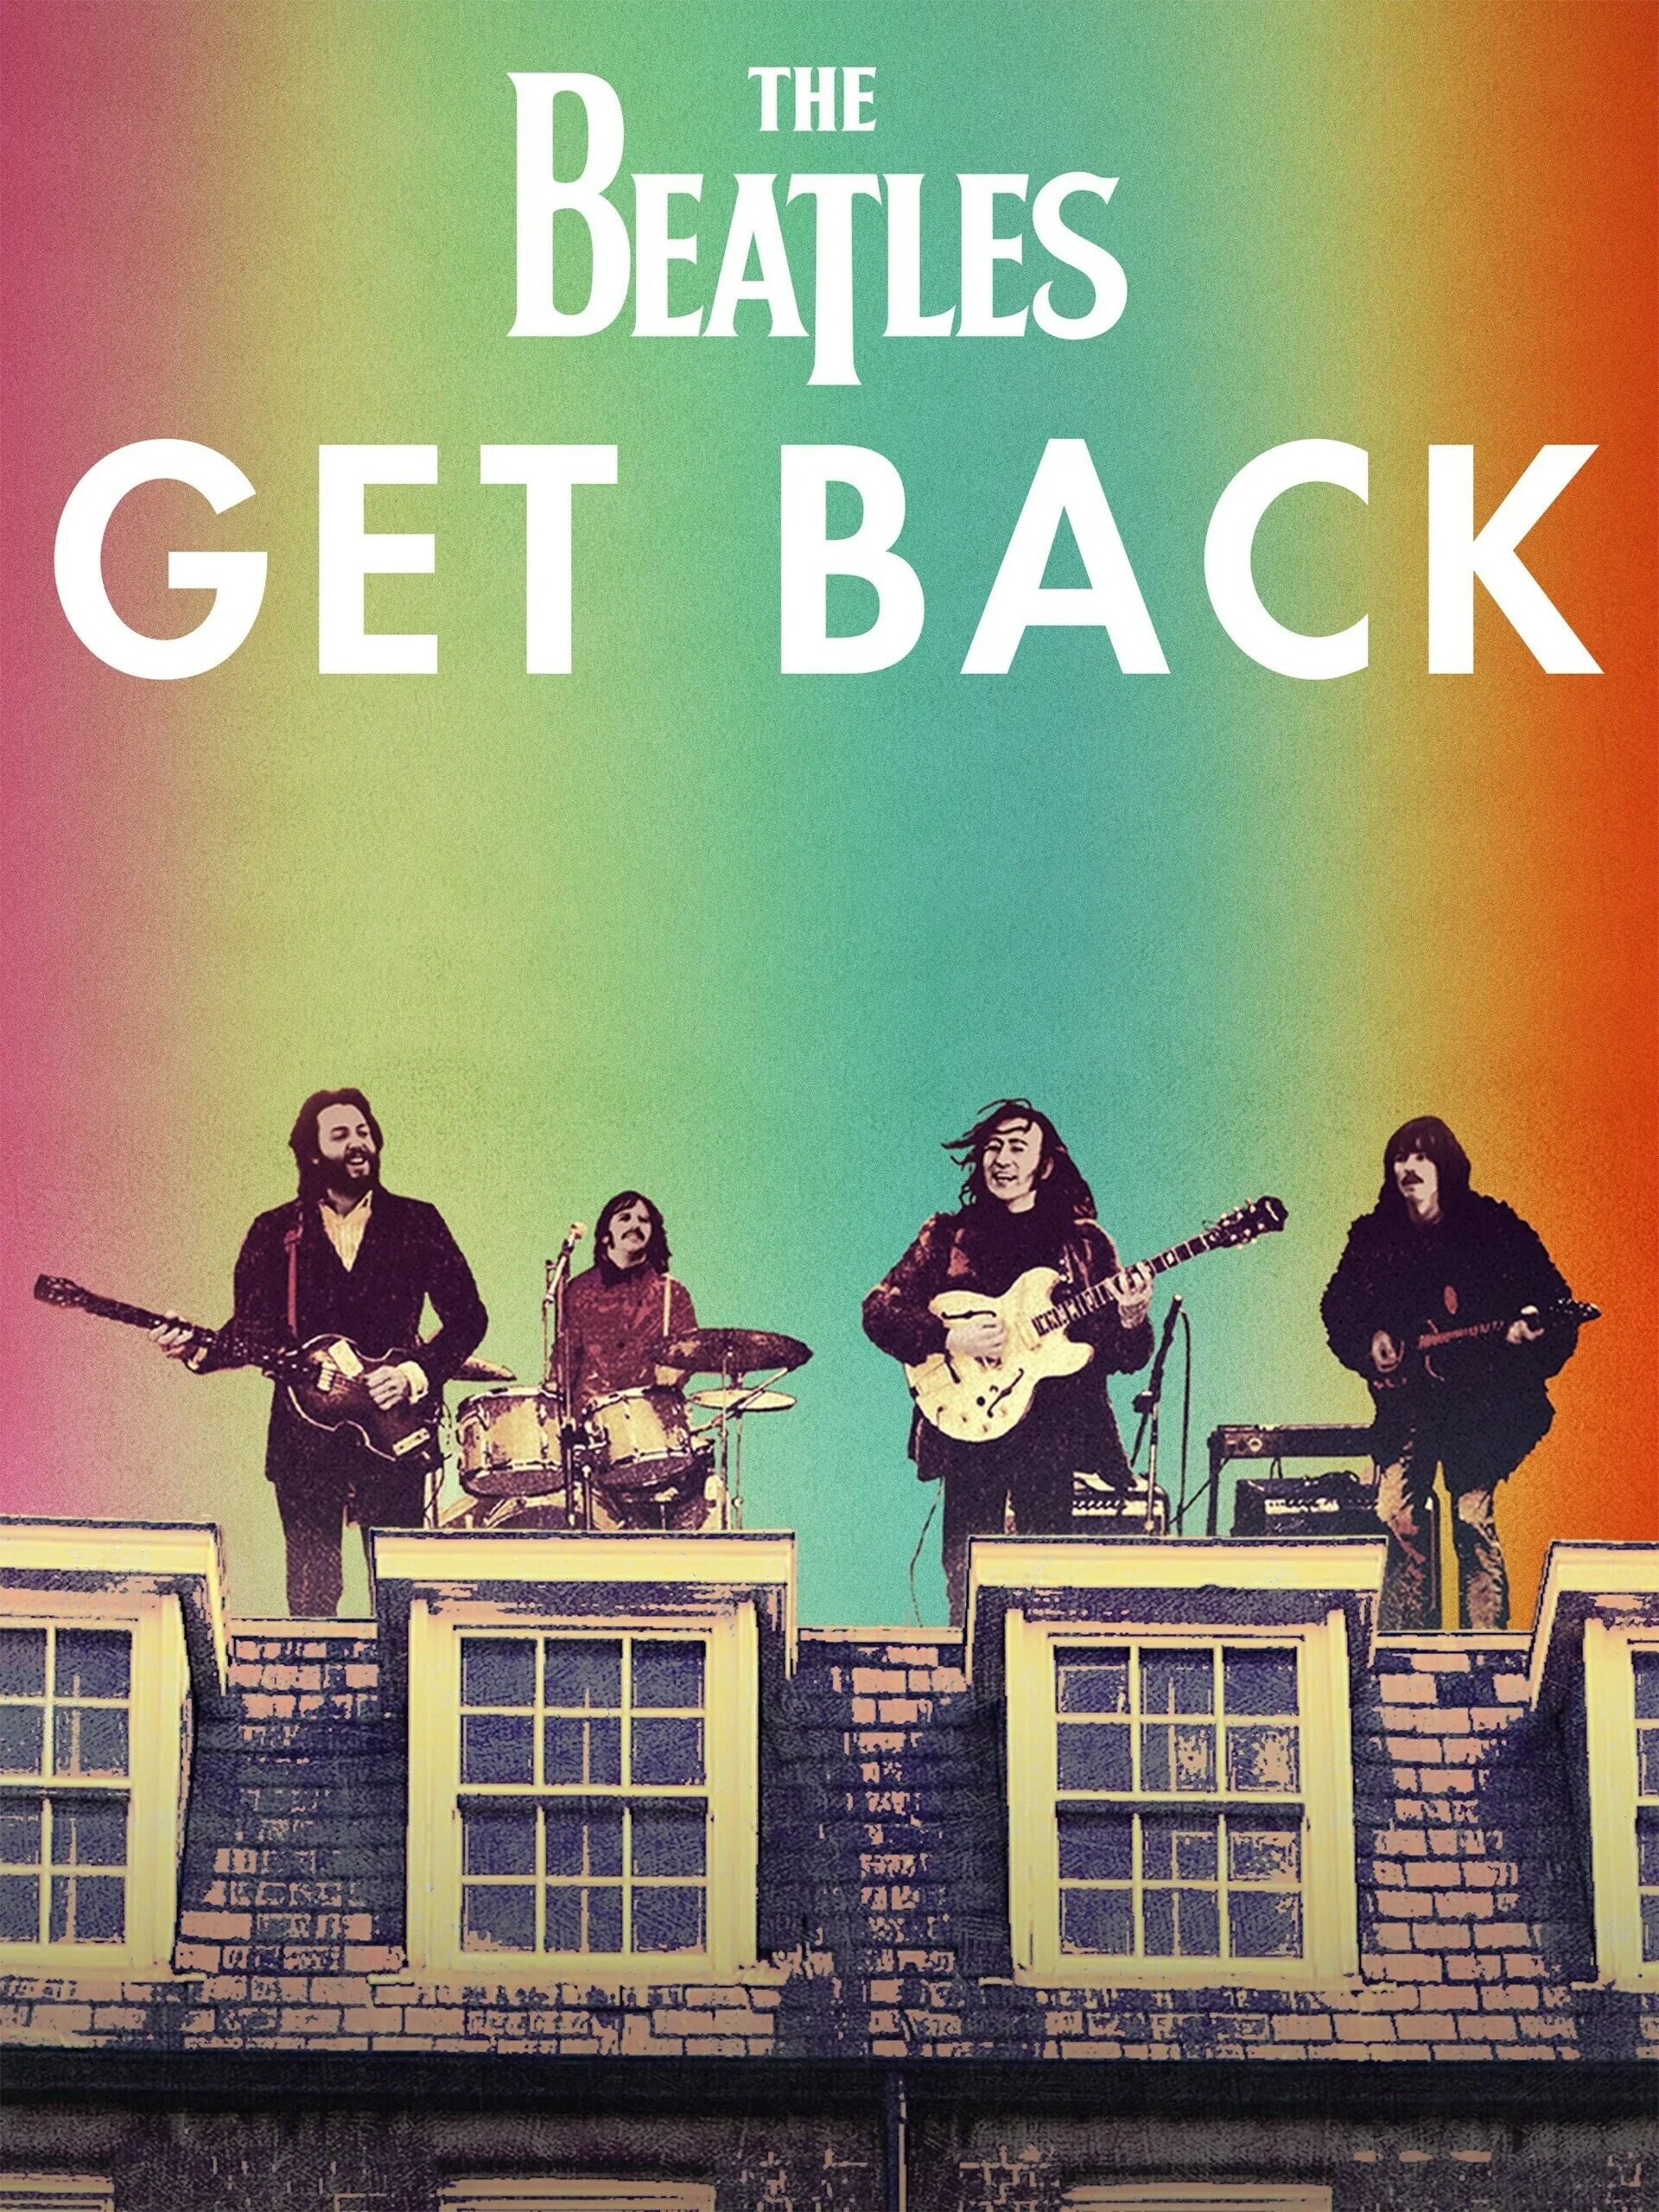 The Beatles 2021. Битлз 2021. The Beatles get back 2021. Get back the beatles